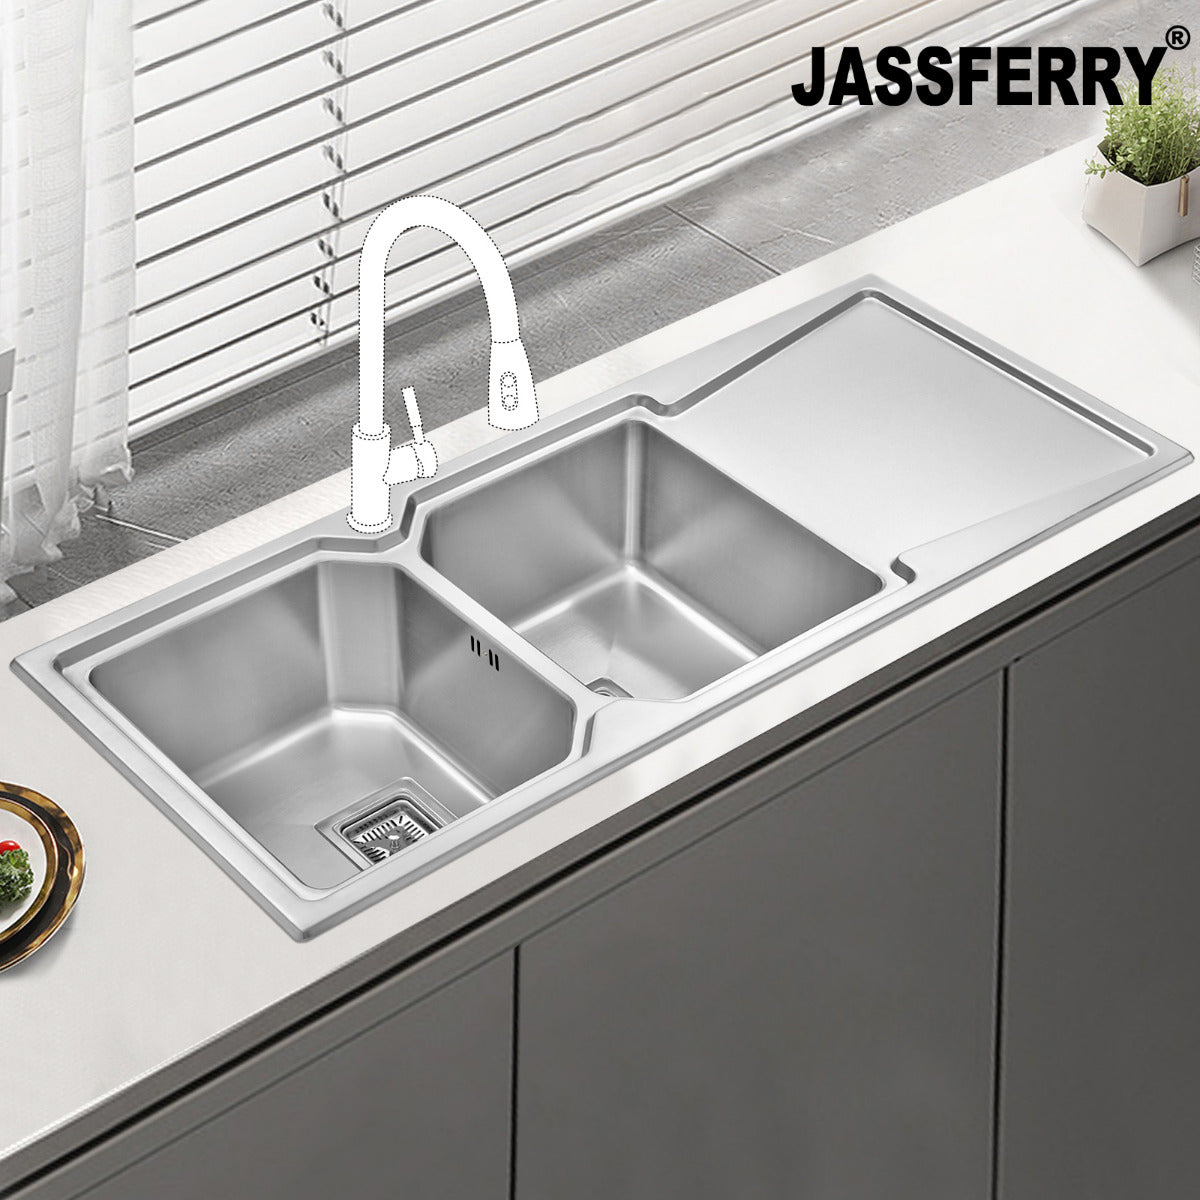 JASSFERRY Stainless Steel Kitchen Sink Reversible Drainer Single Bowl Pipes